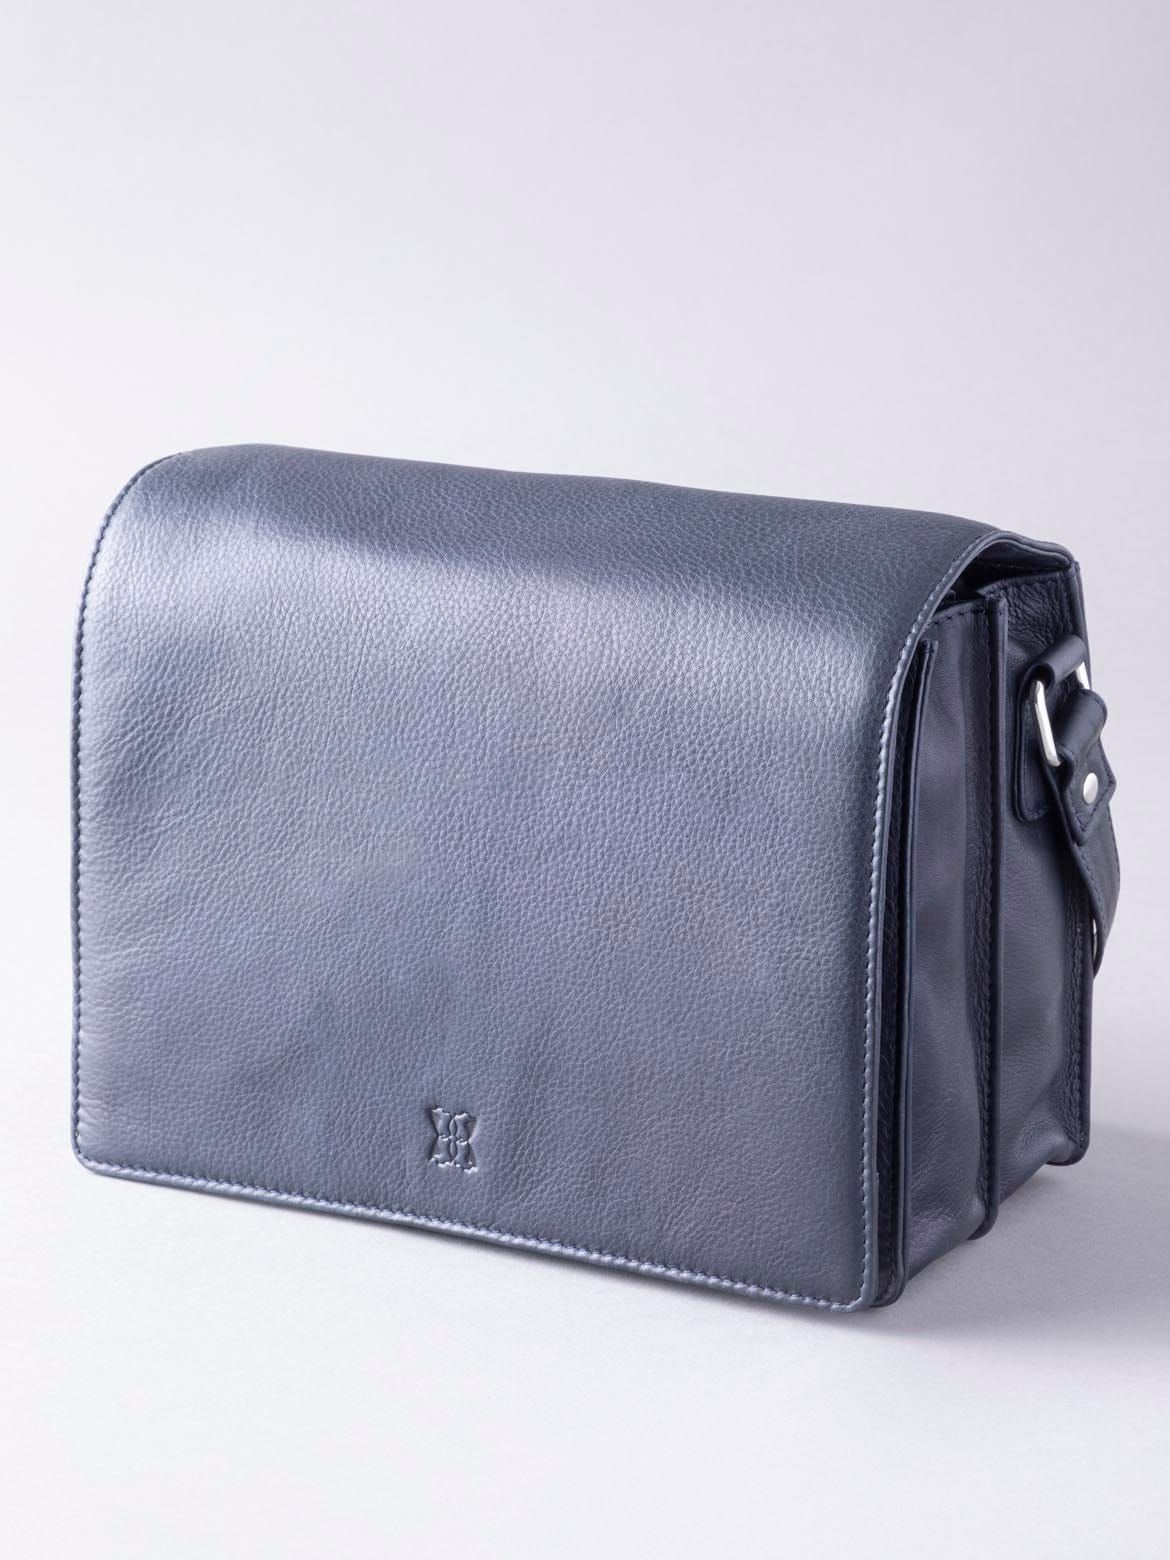 Elegant on the outside and hardworking on the inside, the Ennerdale Leather Organiser Bag in Navy is the perfect work week companion. Embrace this practical yet stylish bag, with pockets for everything from your phone to your cards, and large central compartments for near enough everything else, all neatly housed under the large flapover magnetic design. The long leather and fabric shoulder strap is ideal for slinging over the shoulder or carrying cross body. It's a bag made for business.